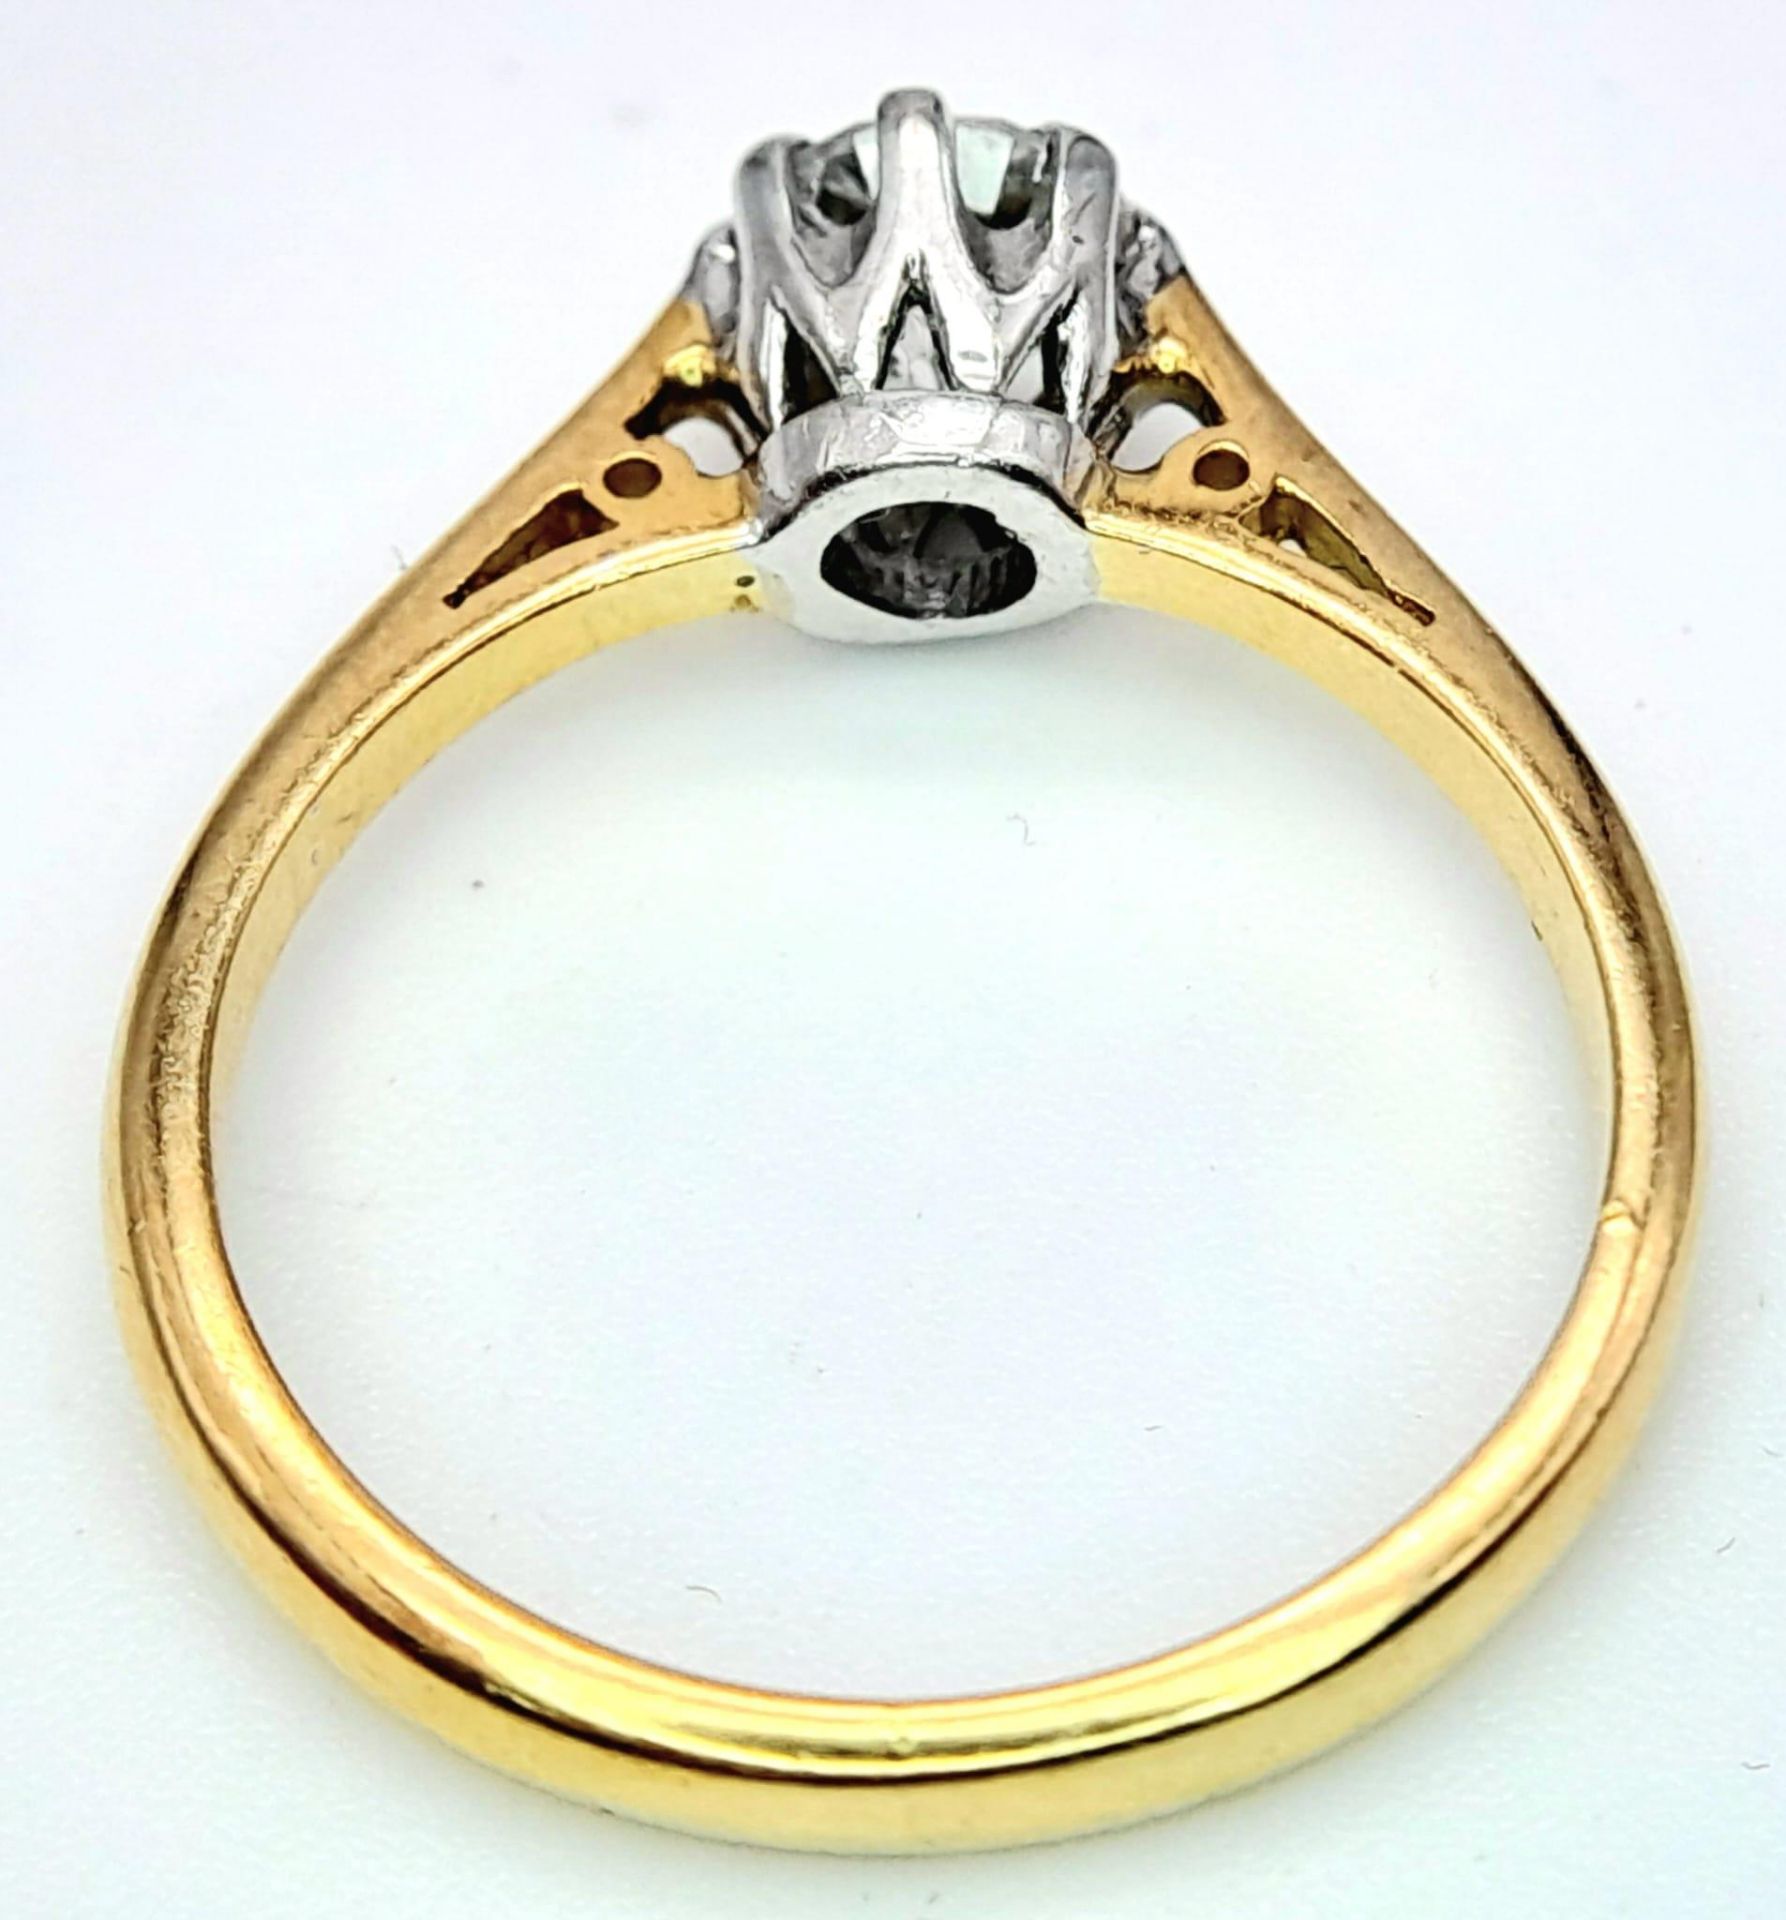 AN 18K YELLOW GOLD DIAMOND SOLITAIRE RING - 0.65CT. 8 CLAW SETTING. 3.4G. SIZE L. - Image 4 of 5